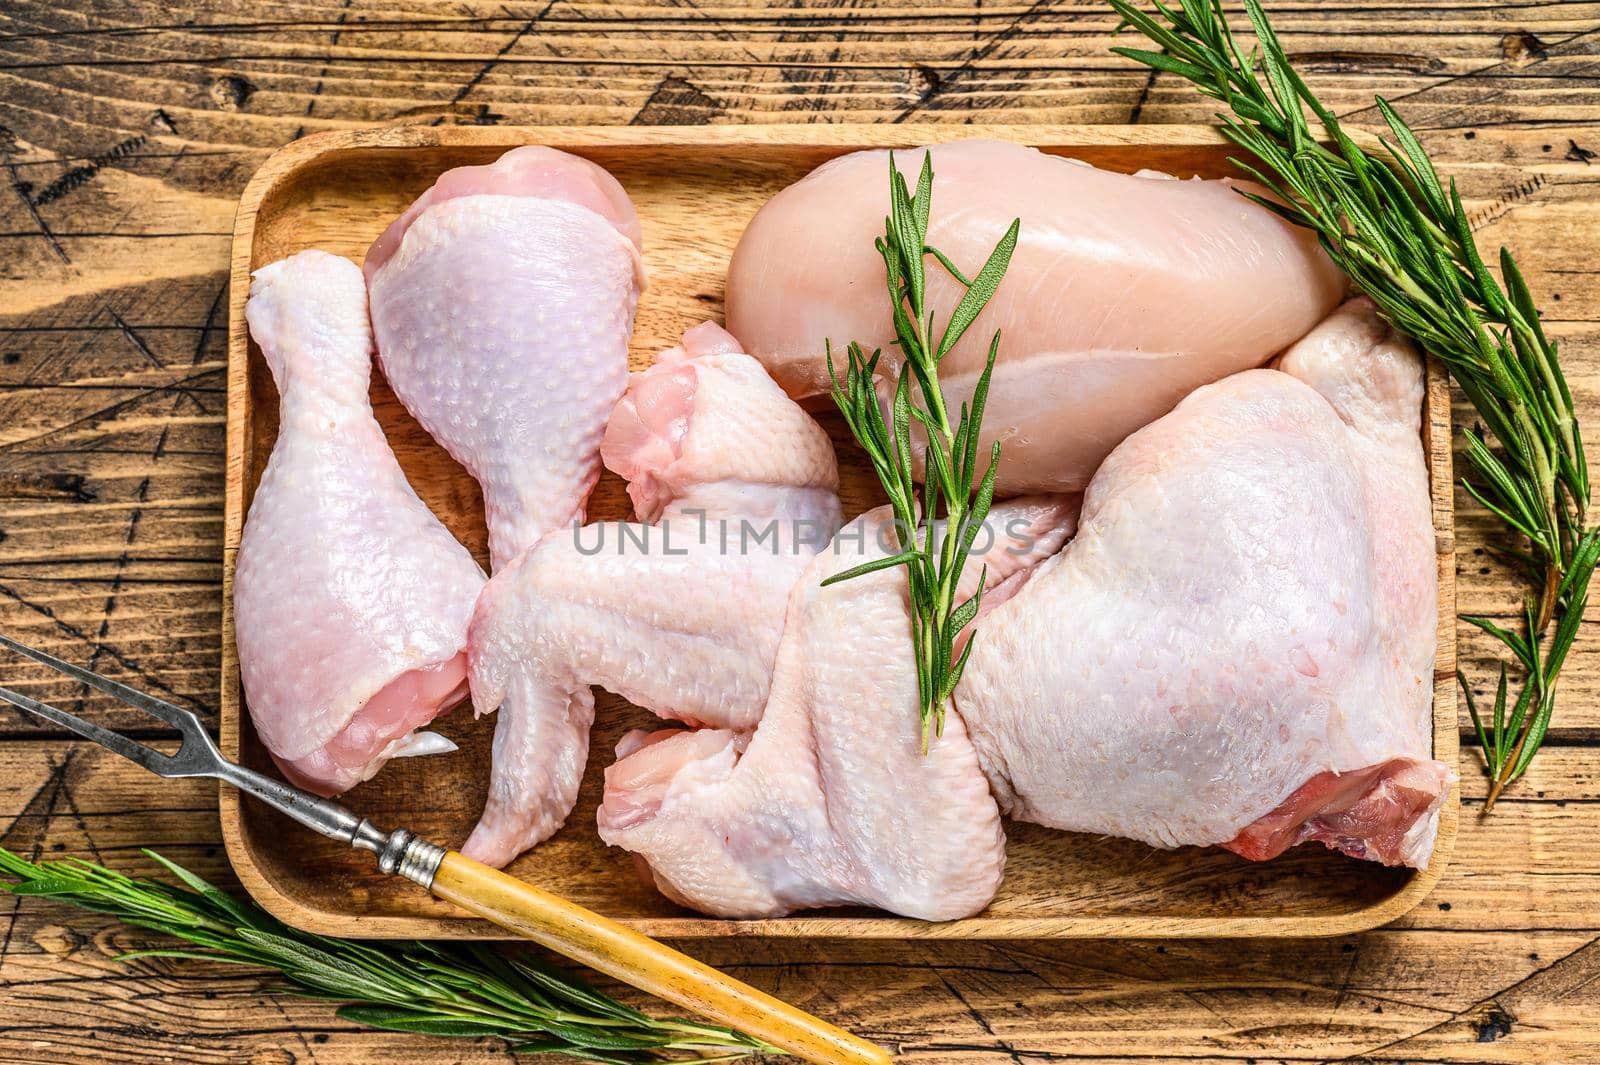 Fresh raw chicken meat, wings, breast, thigh and drumsticks on a wooden tray. Wooden background. Top view.